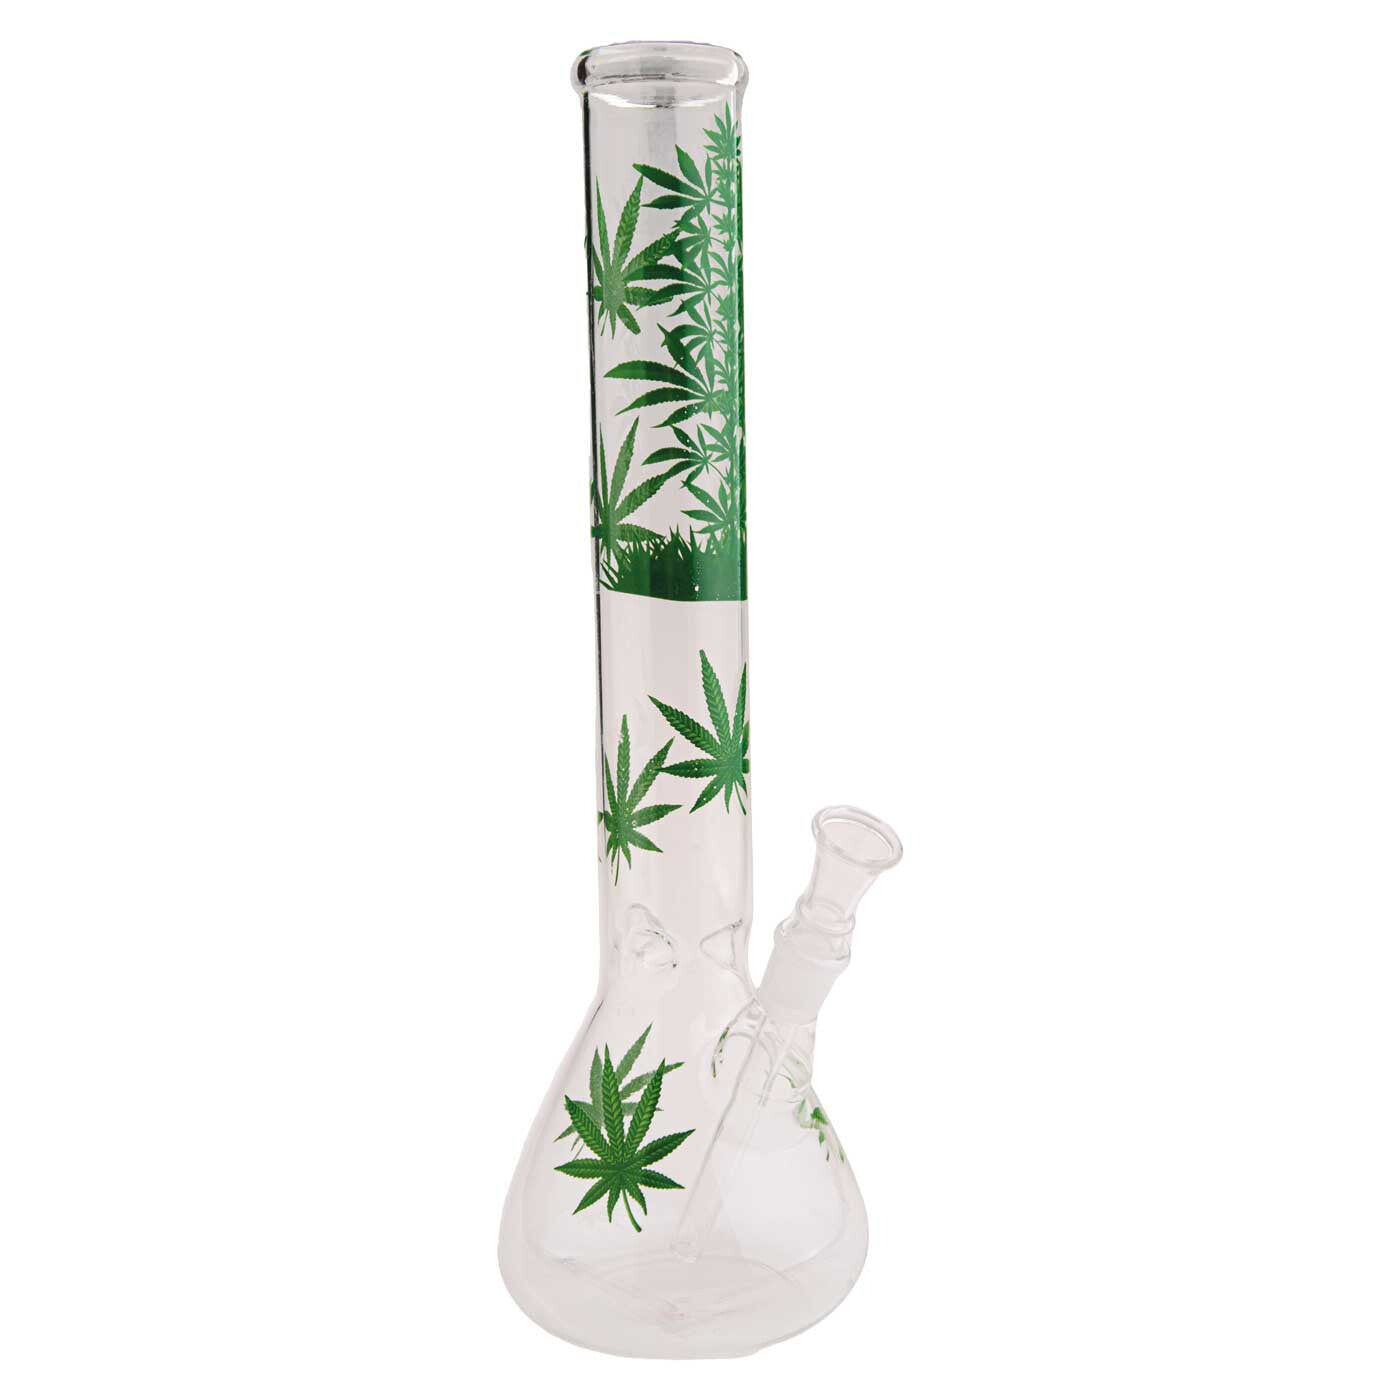 Weed Glass Bong Gb-04